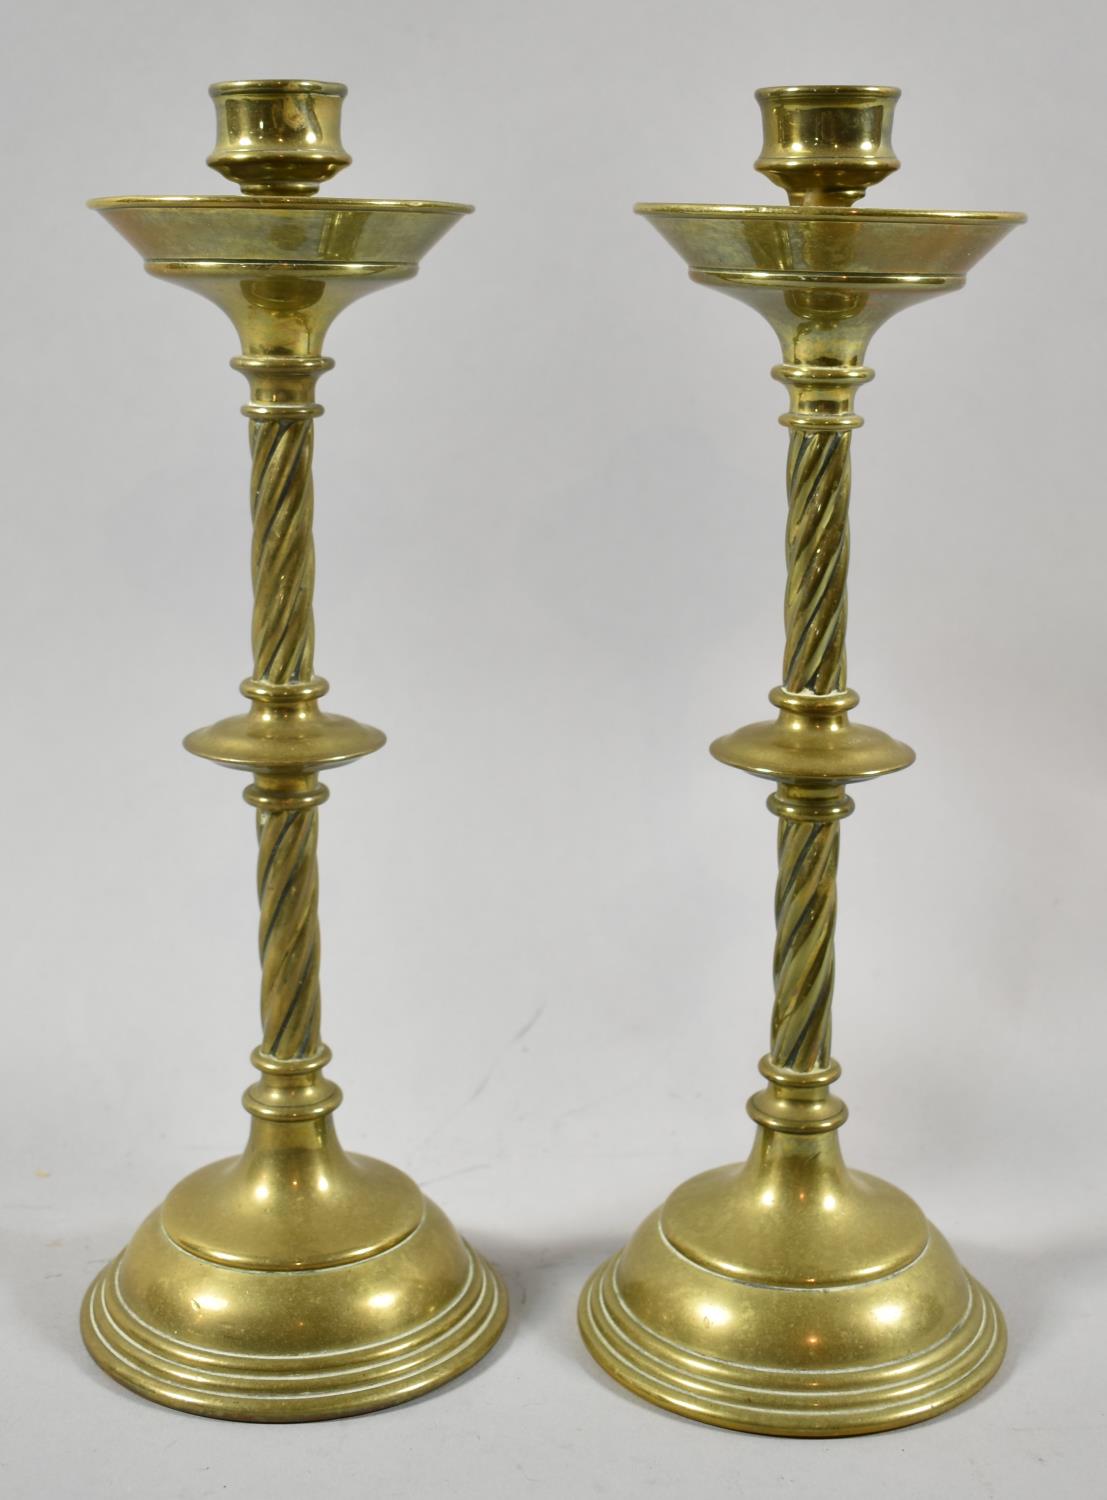 A Pair of Arts and Crafts Brass Candlesticks with Twisted Stems, 26.5cm high